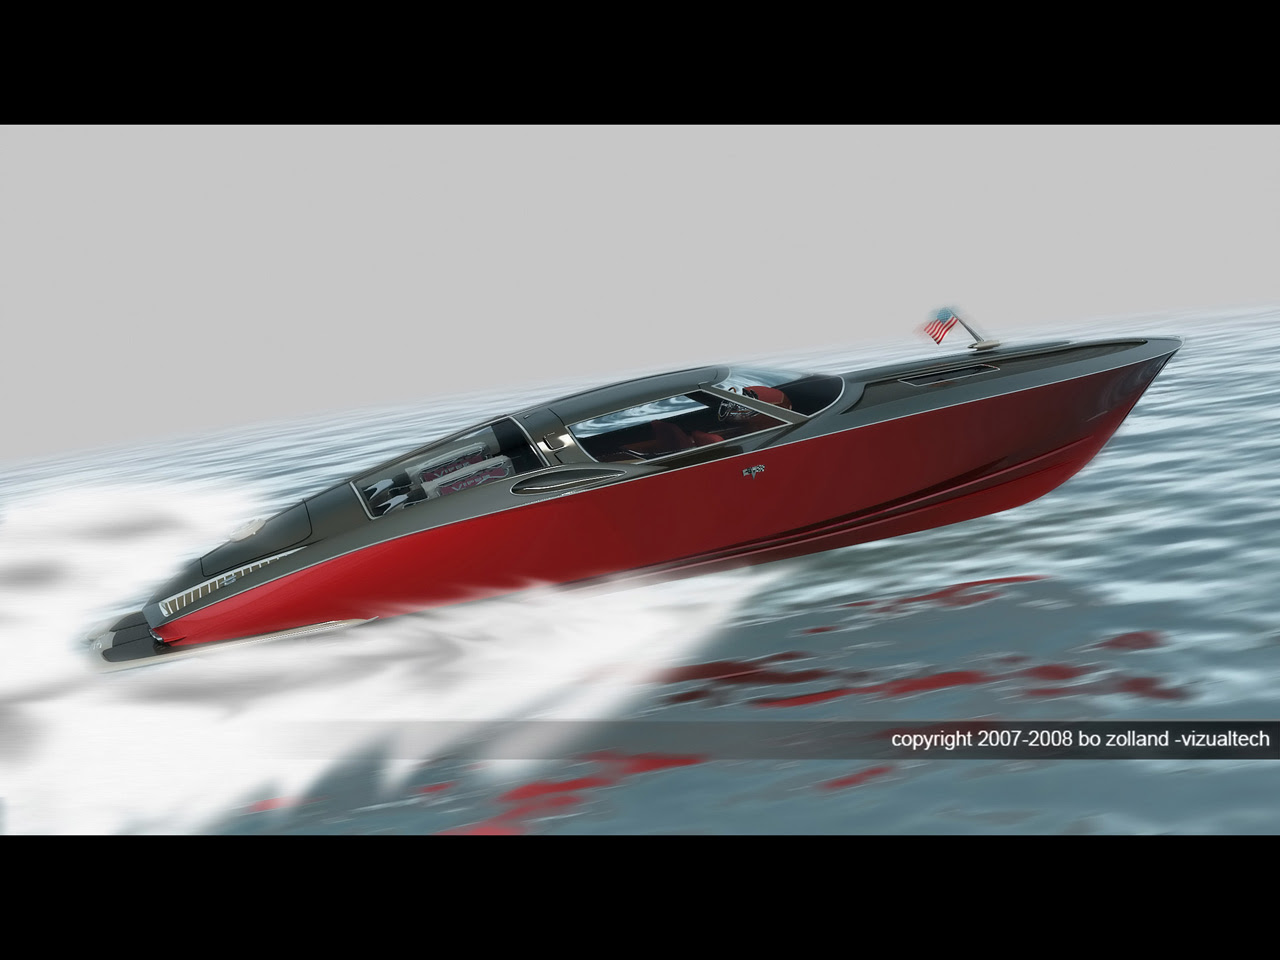 boat model speed boat plans free how to build diy pdf